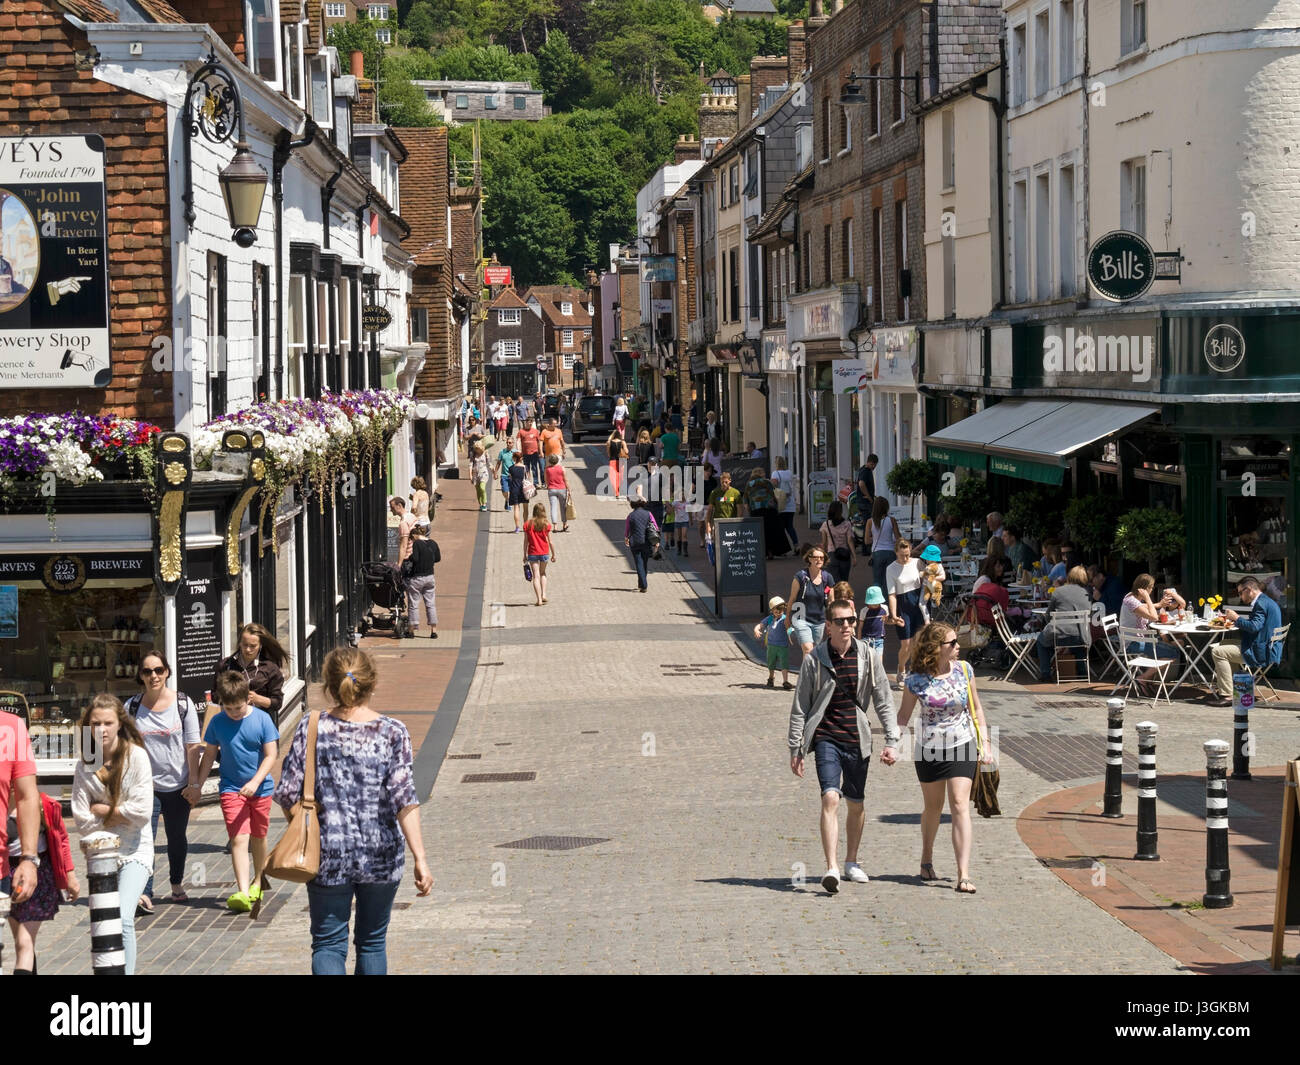 Busy pedestrianised Cliffe High Street with shops and shoppers on a sunny day in Summer, Lewes, East Sussex, England, UK Stock Photo